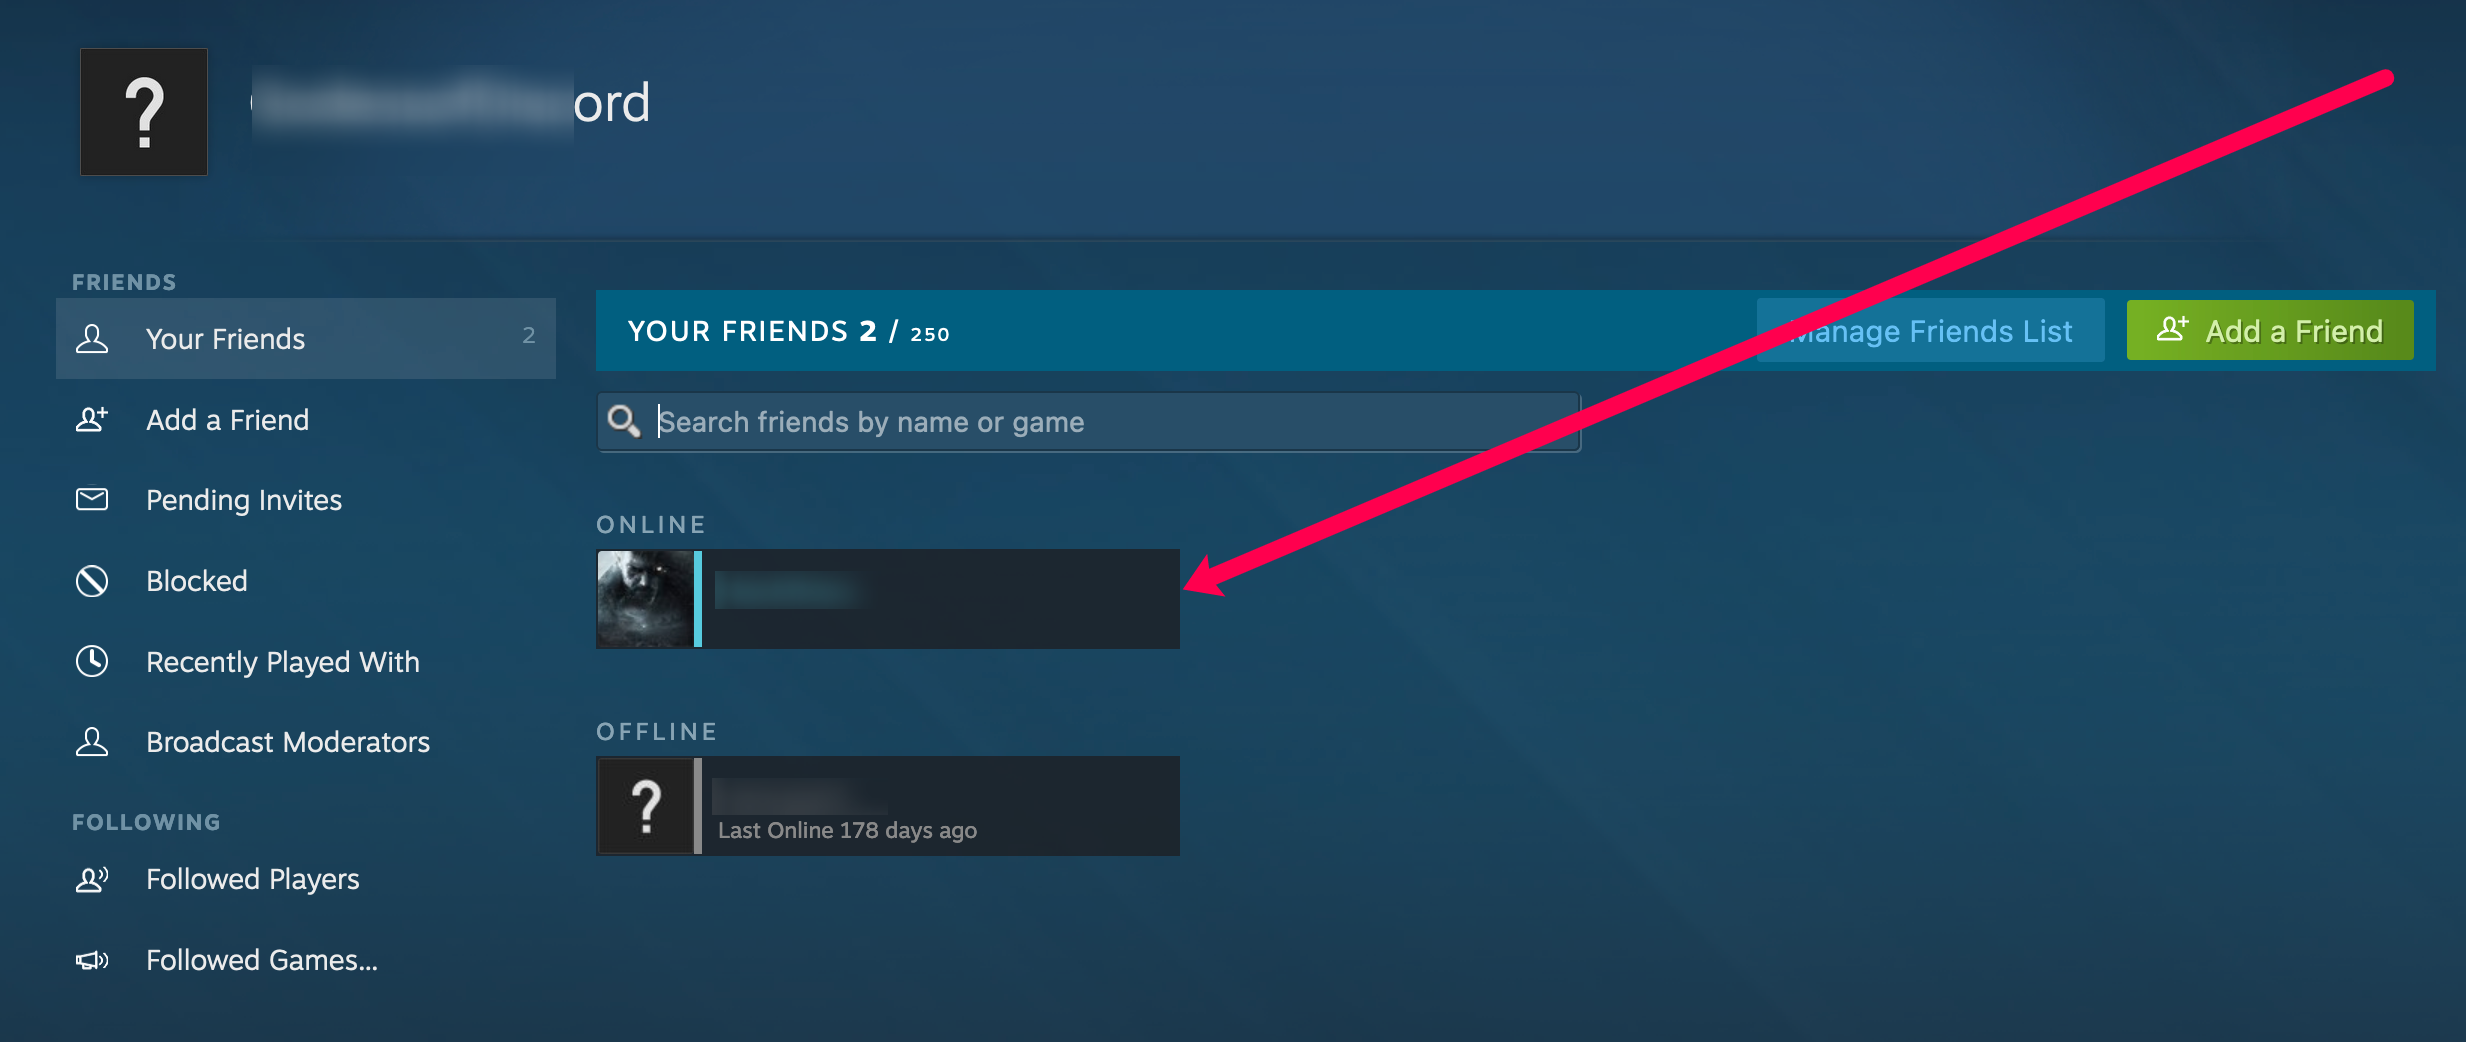 how to view a friends wishlist on steam?